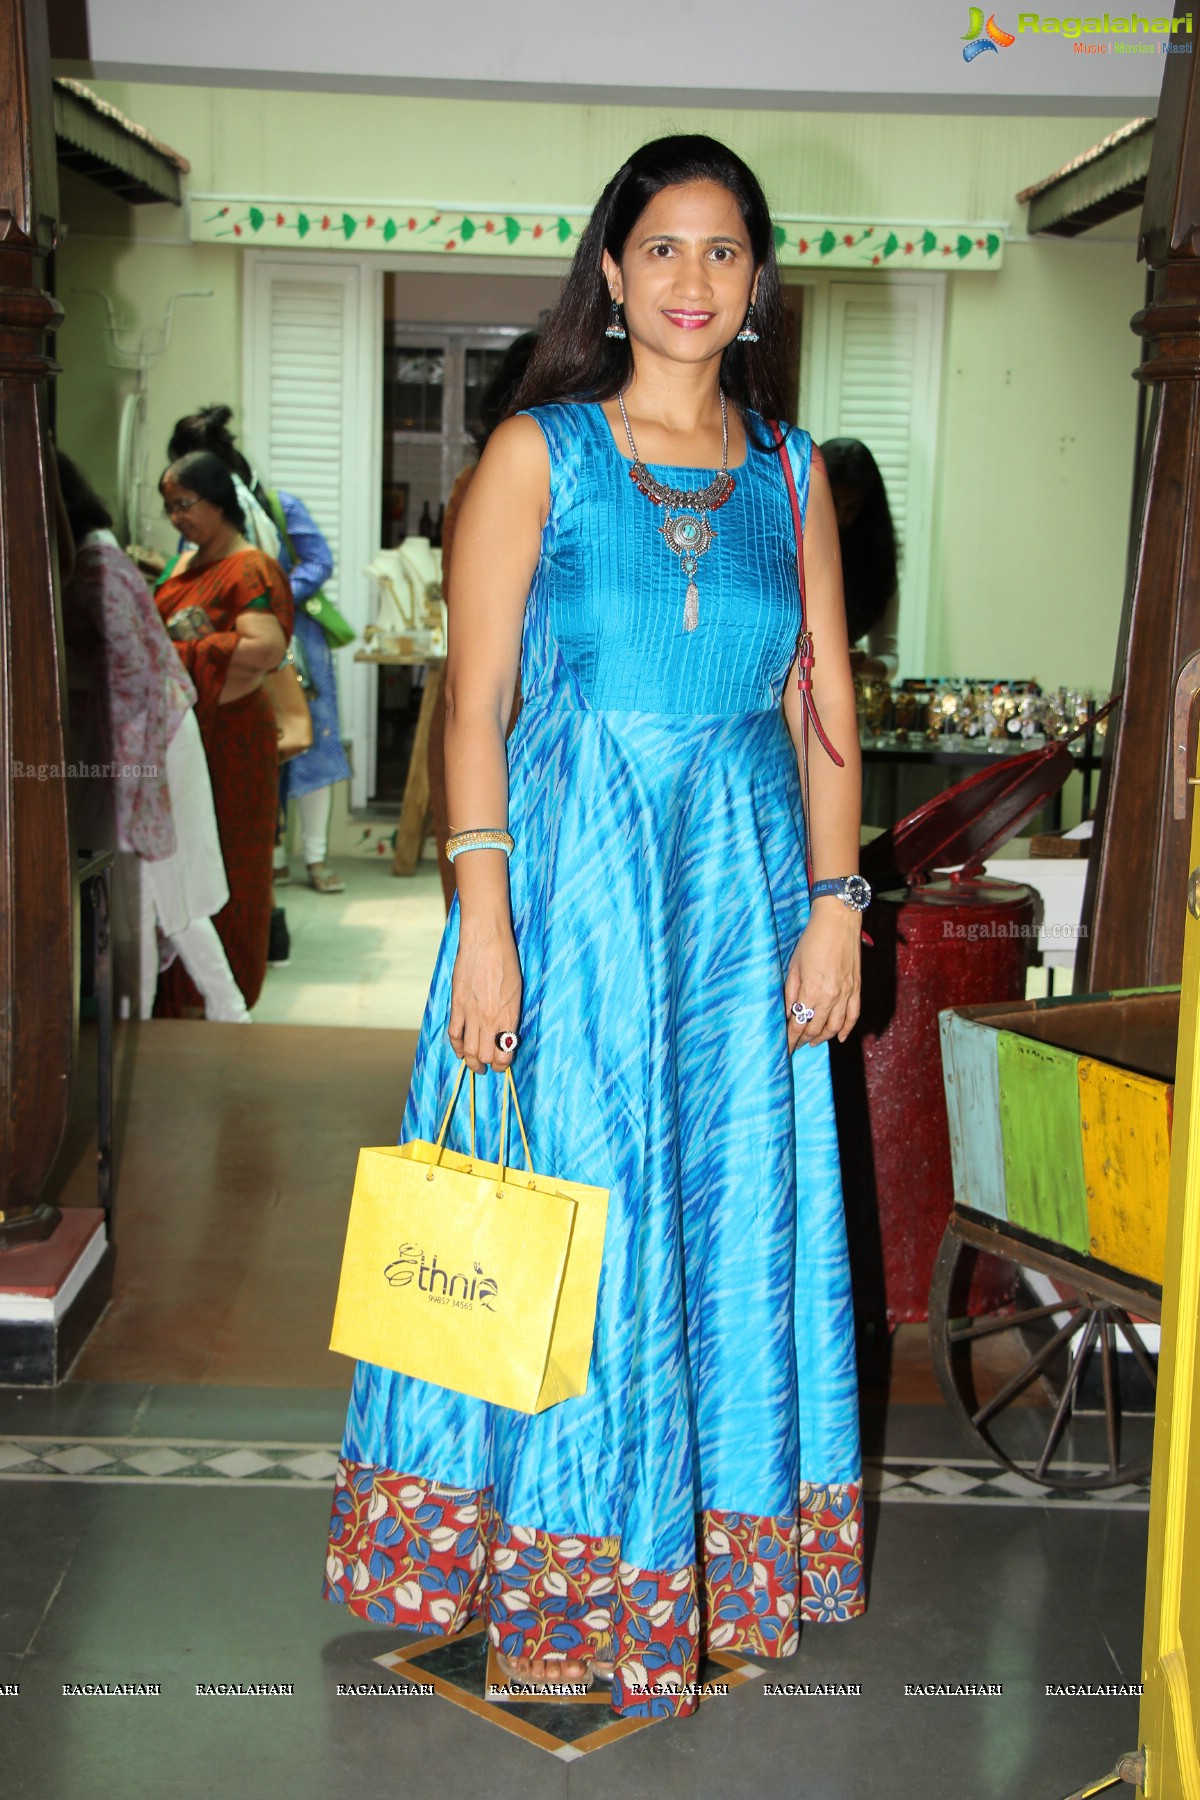 Silver Jewellery Show by Ethniq and Swathi Kilaru at The Autumn Leaf, Jubilee Hills, Hyderabad